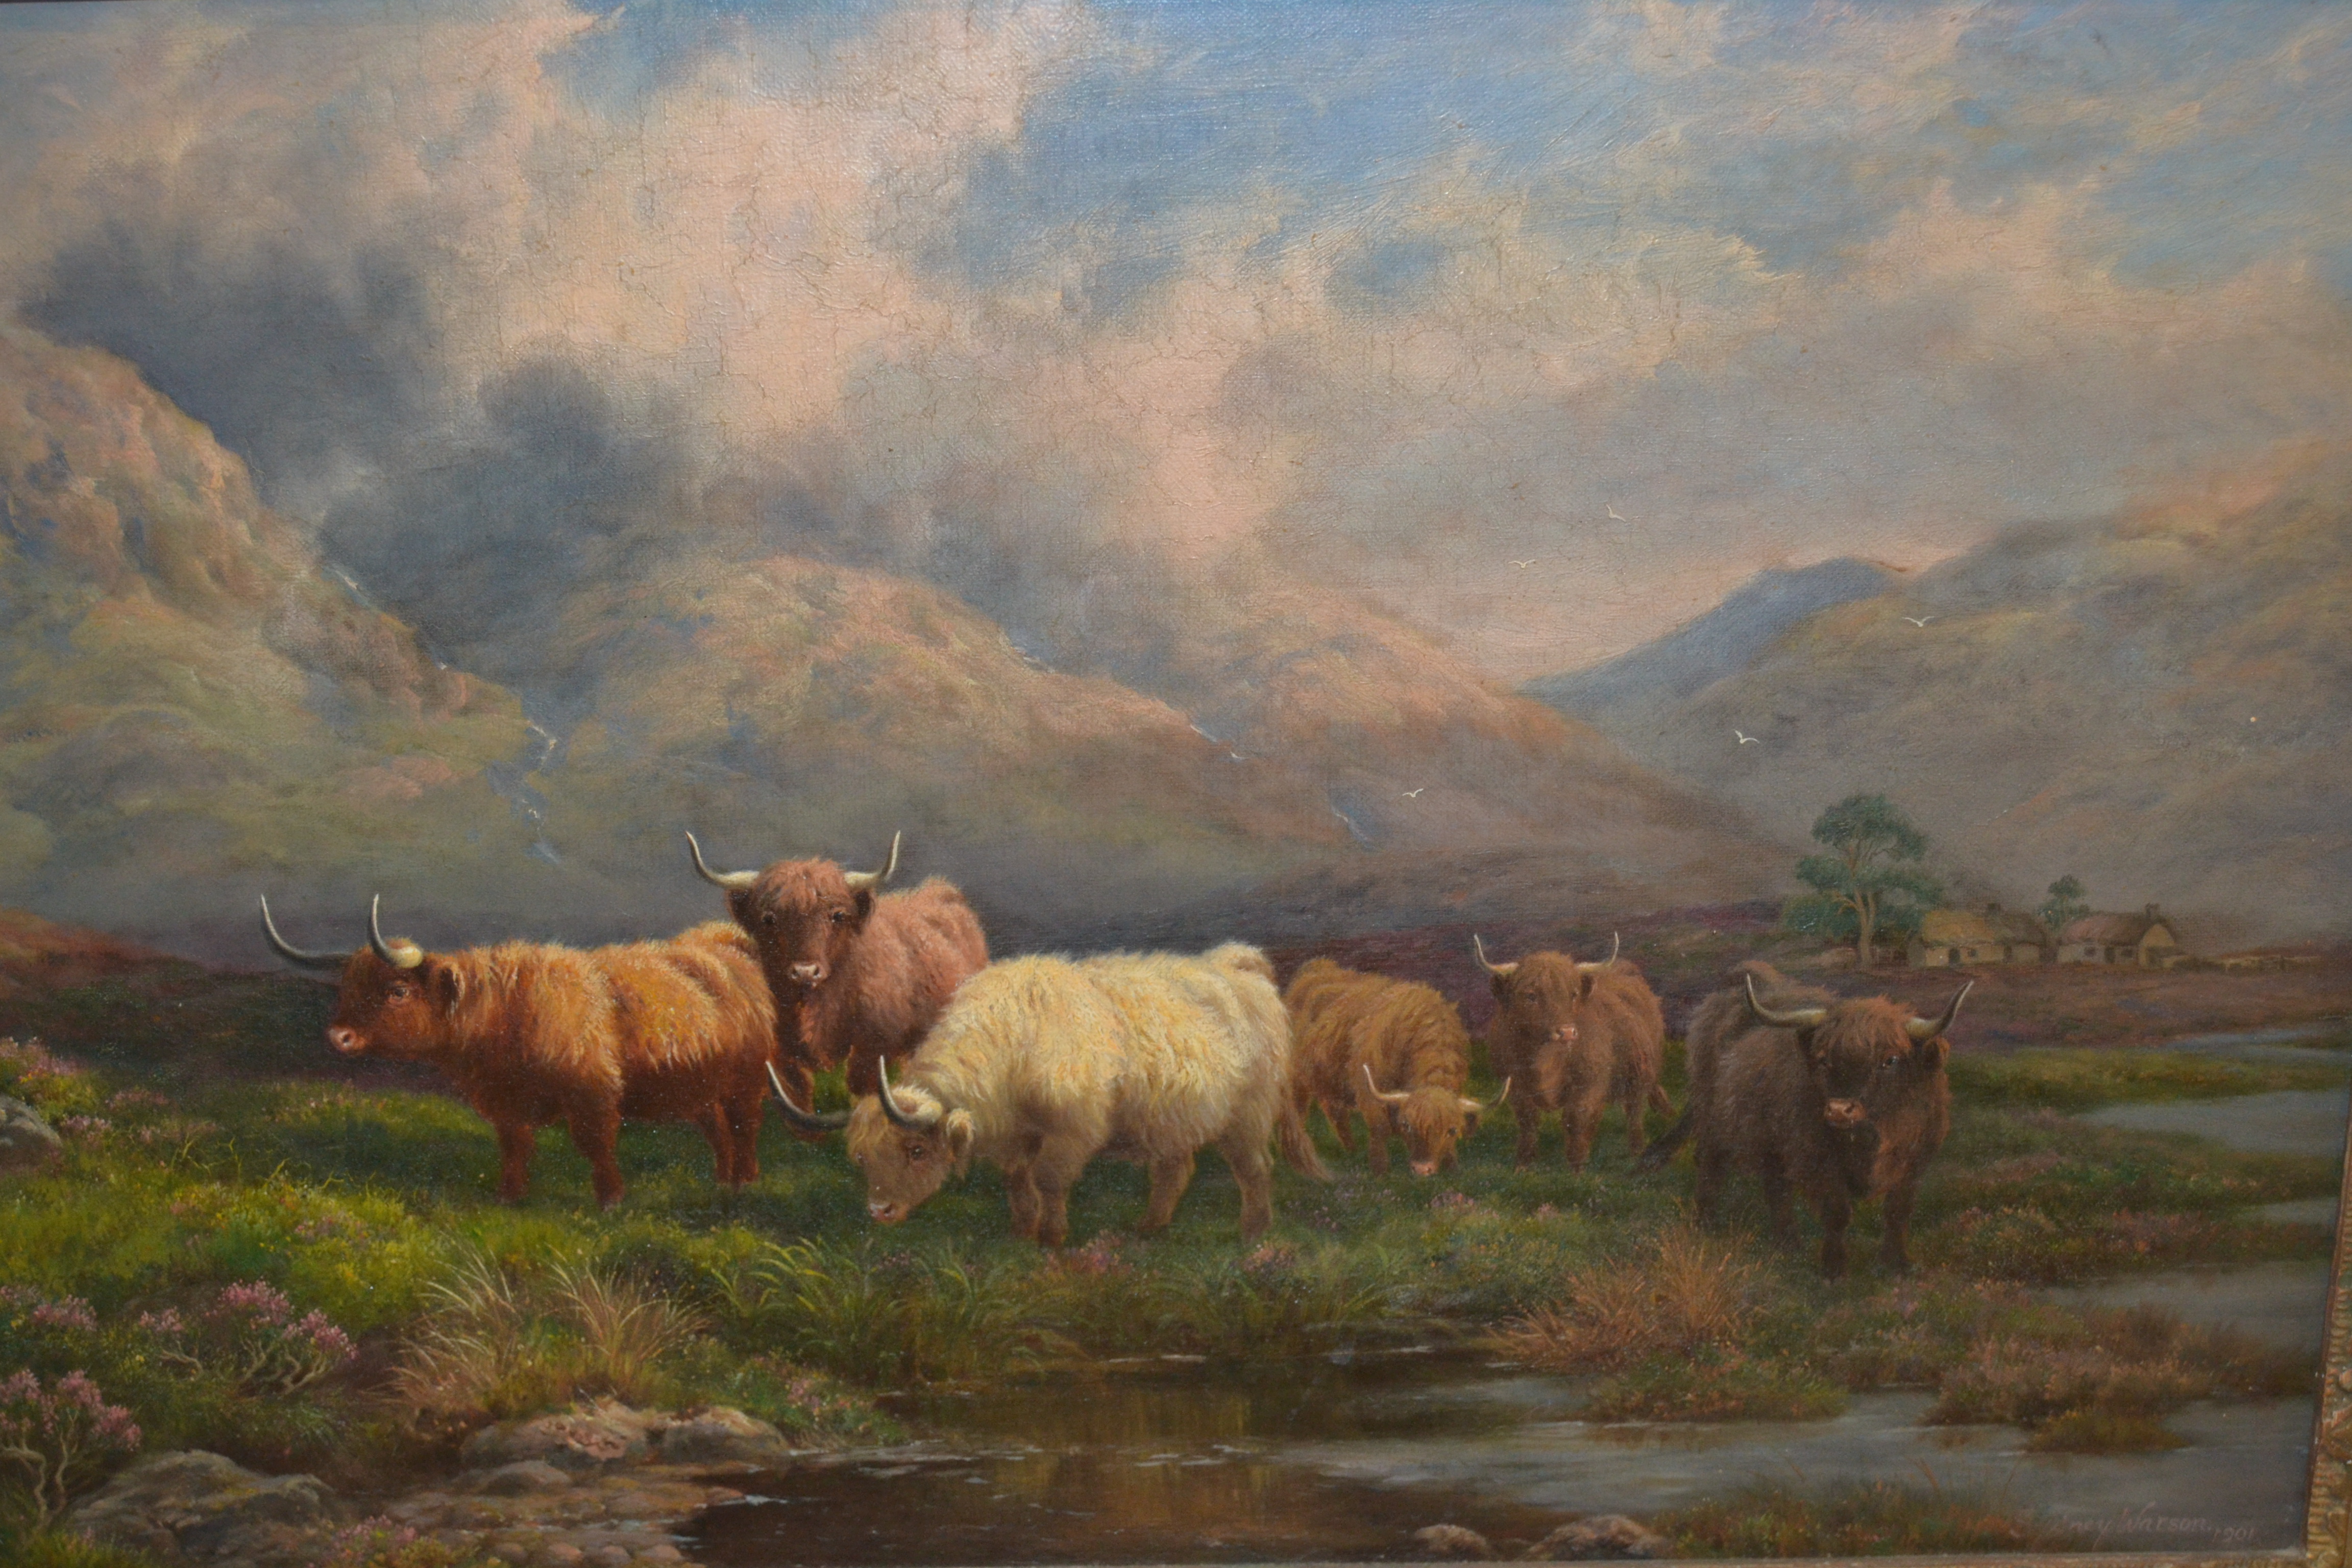 Sydney Robert Watson, oil on canvas ' Glen Loin - Argyllshire ', signed and dated 1901, 14ins x